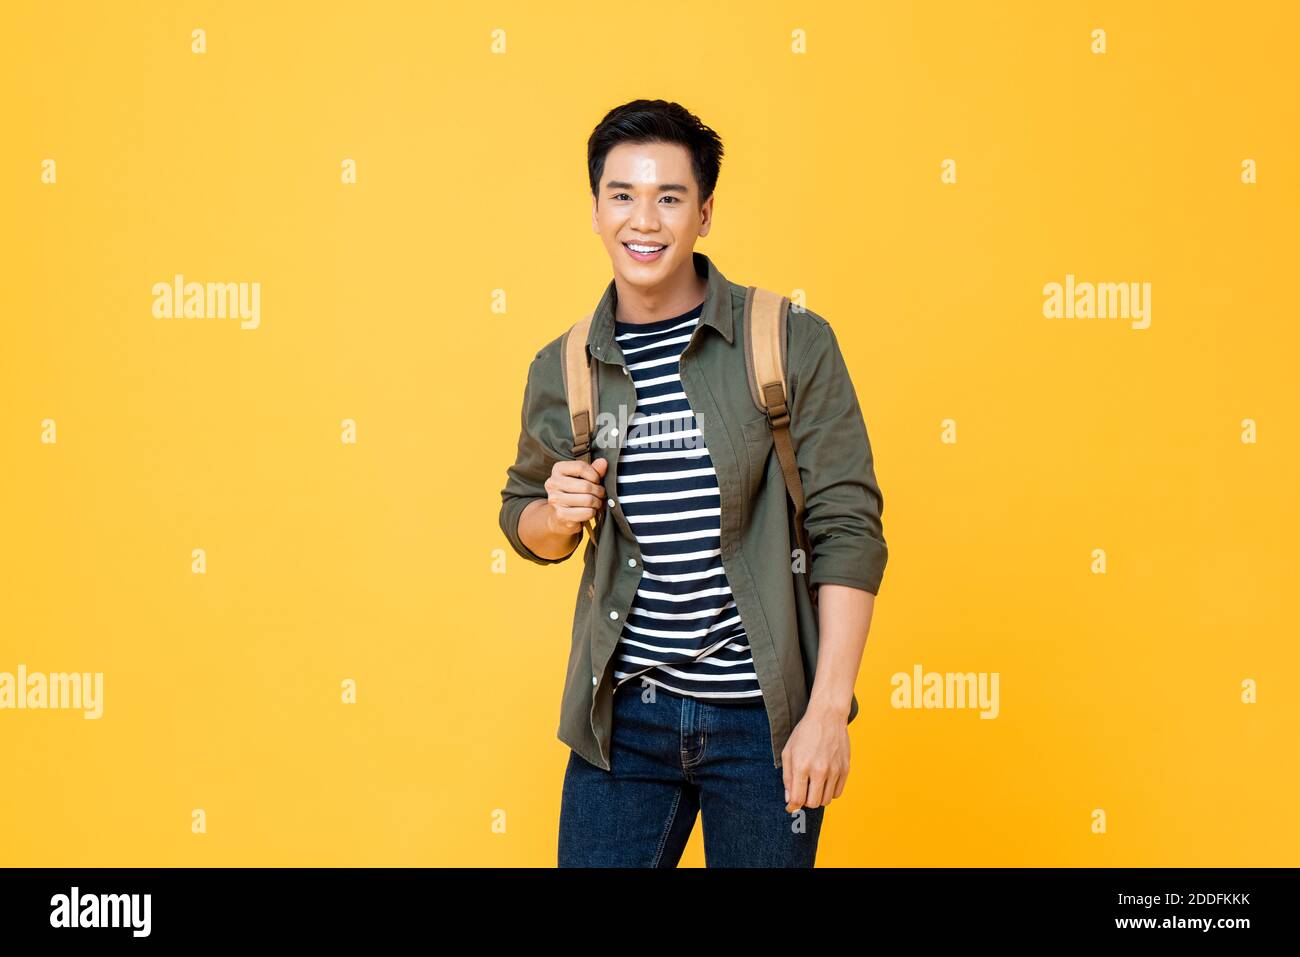 Portrait of smiling young male Asian tourist carrying backpack ready to travel in isolated studio yellow background Stock Photo